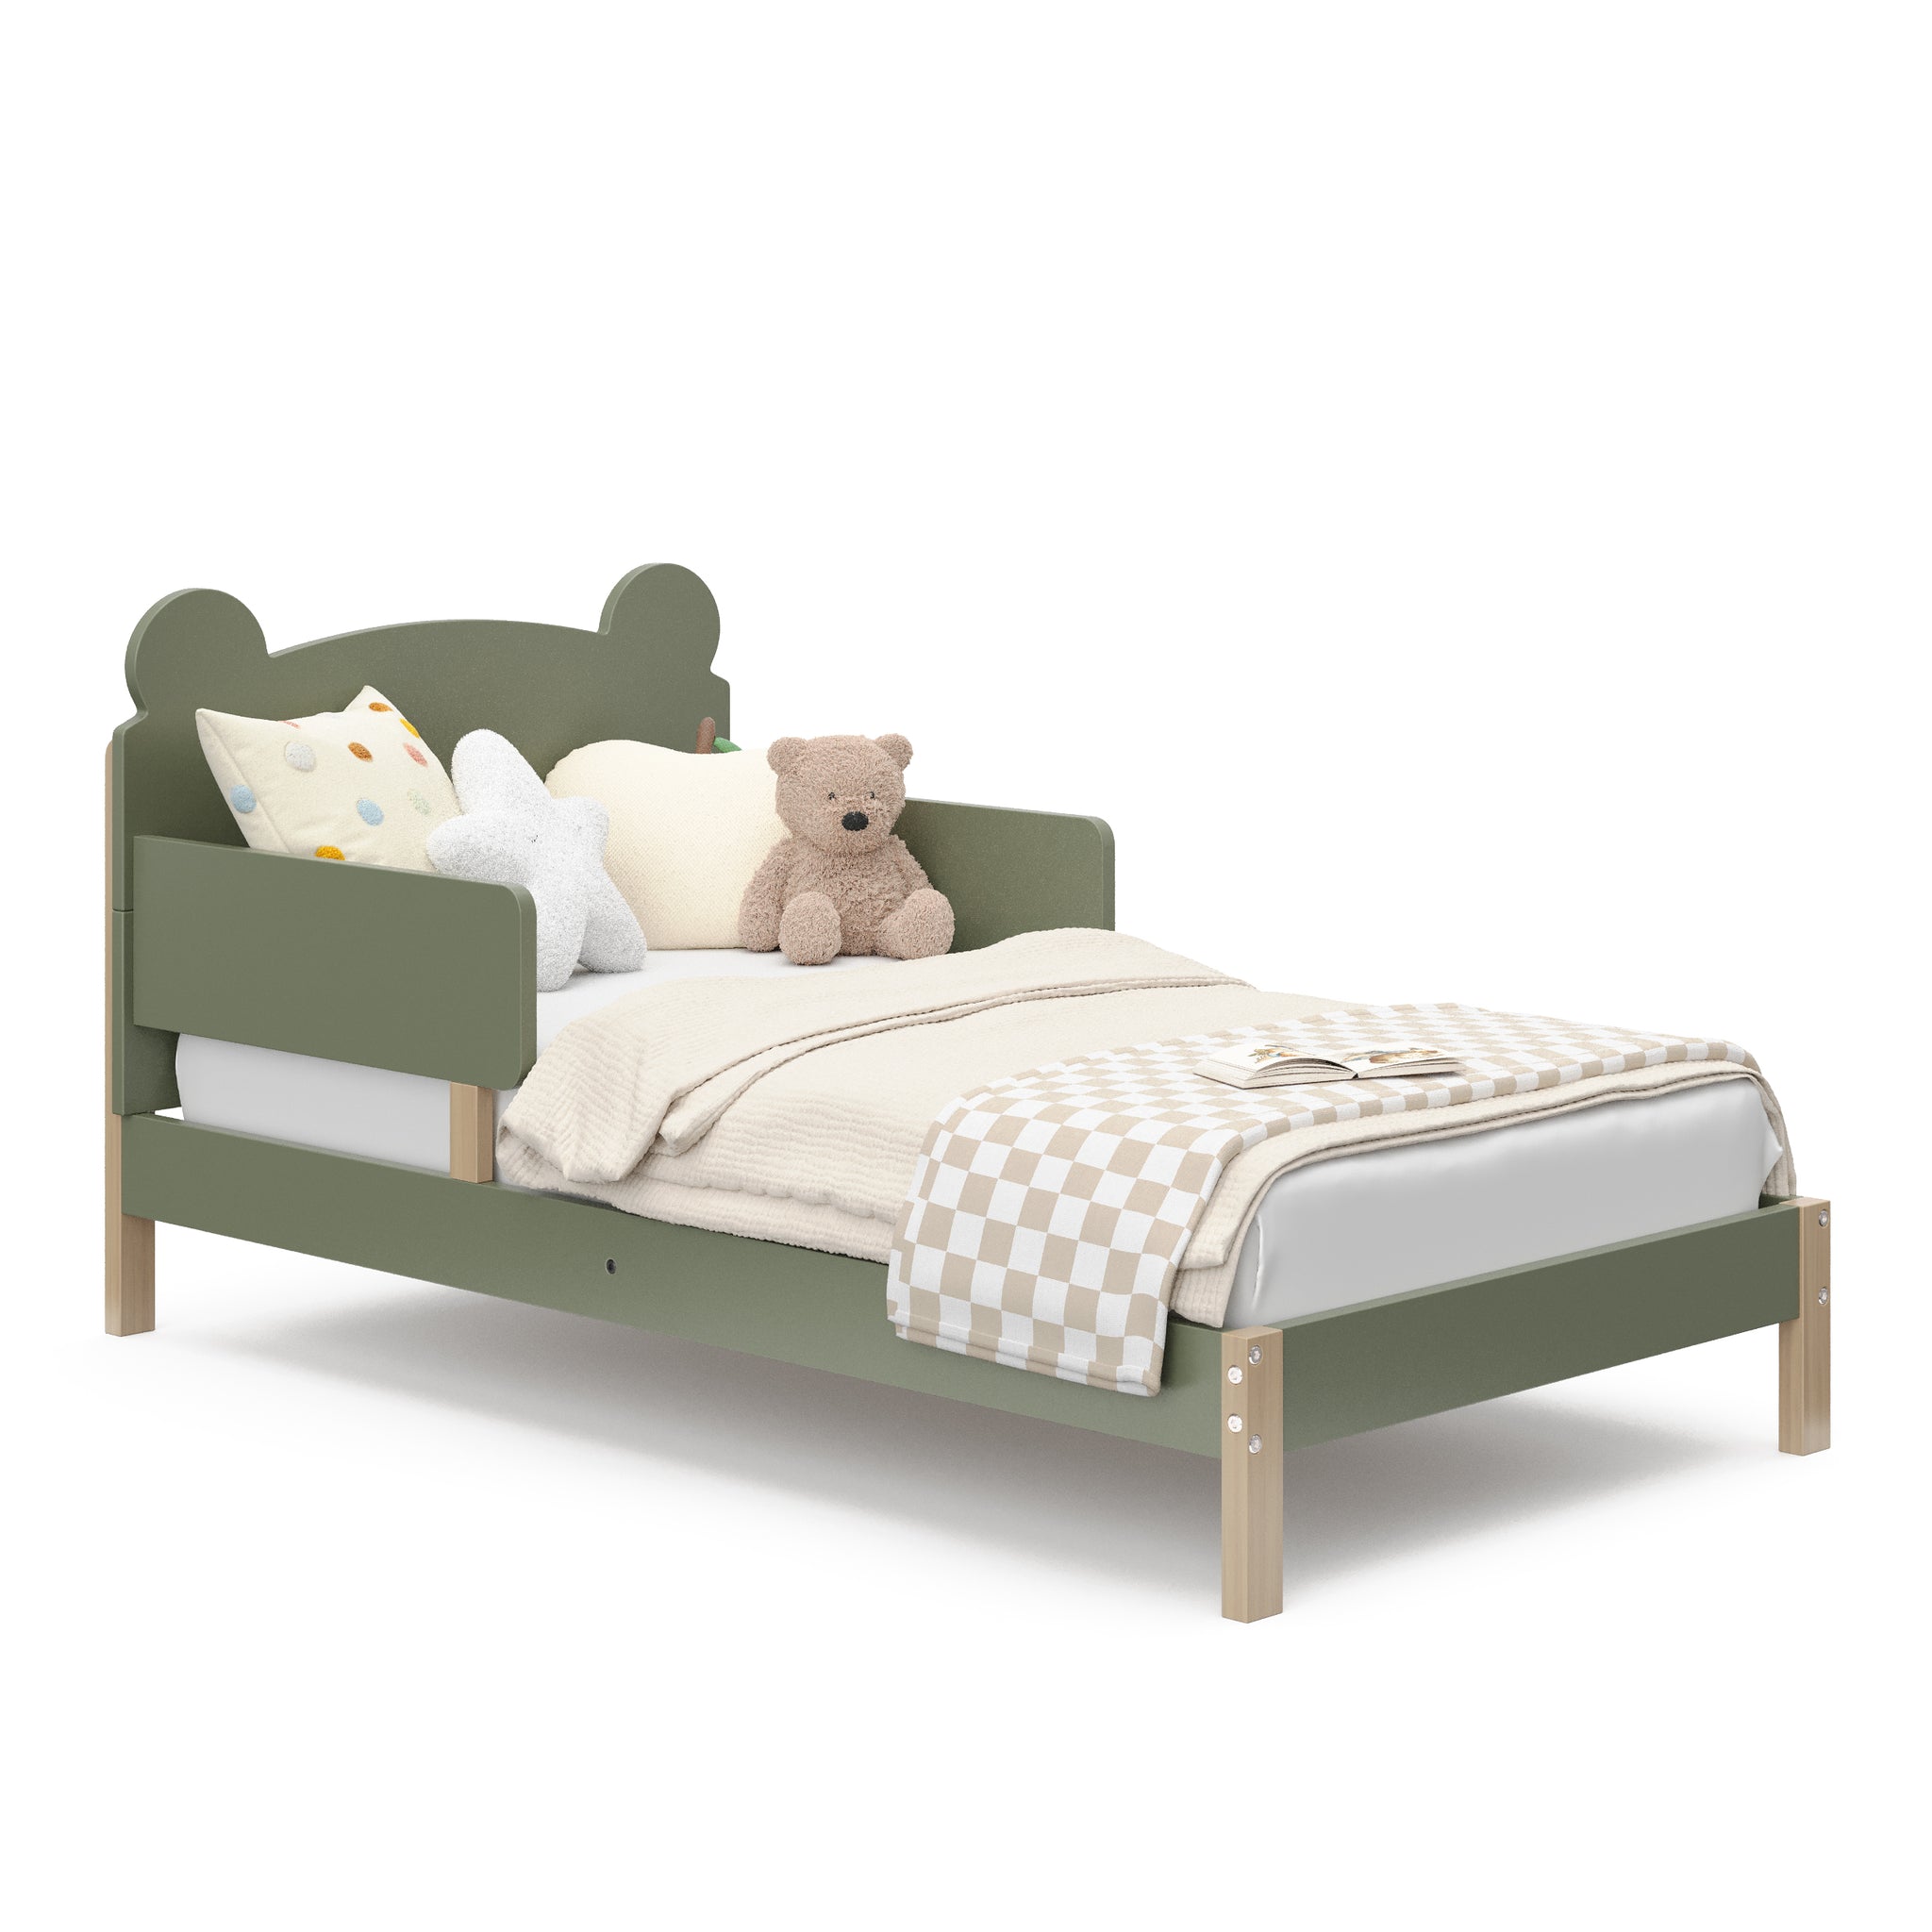 Angled view of a olive-colored toddler bed